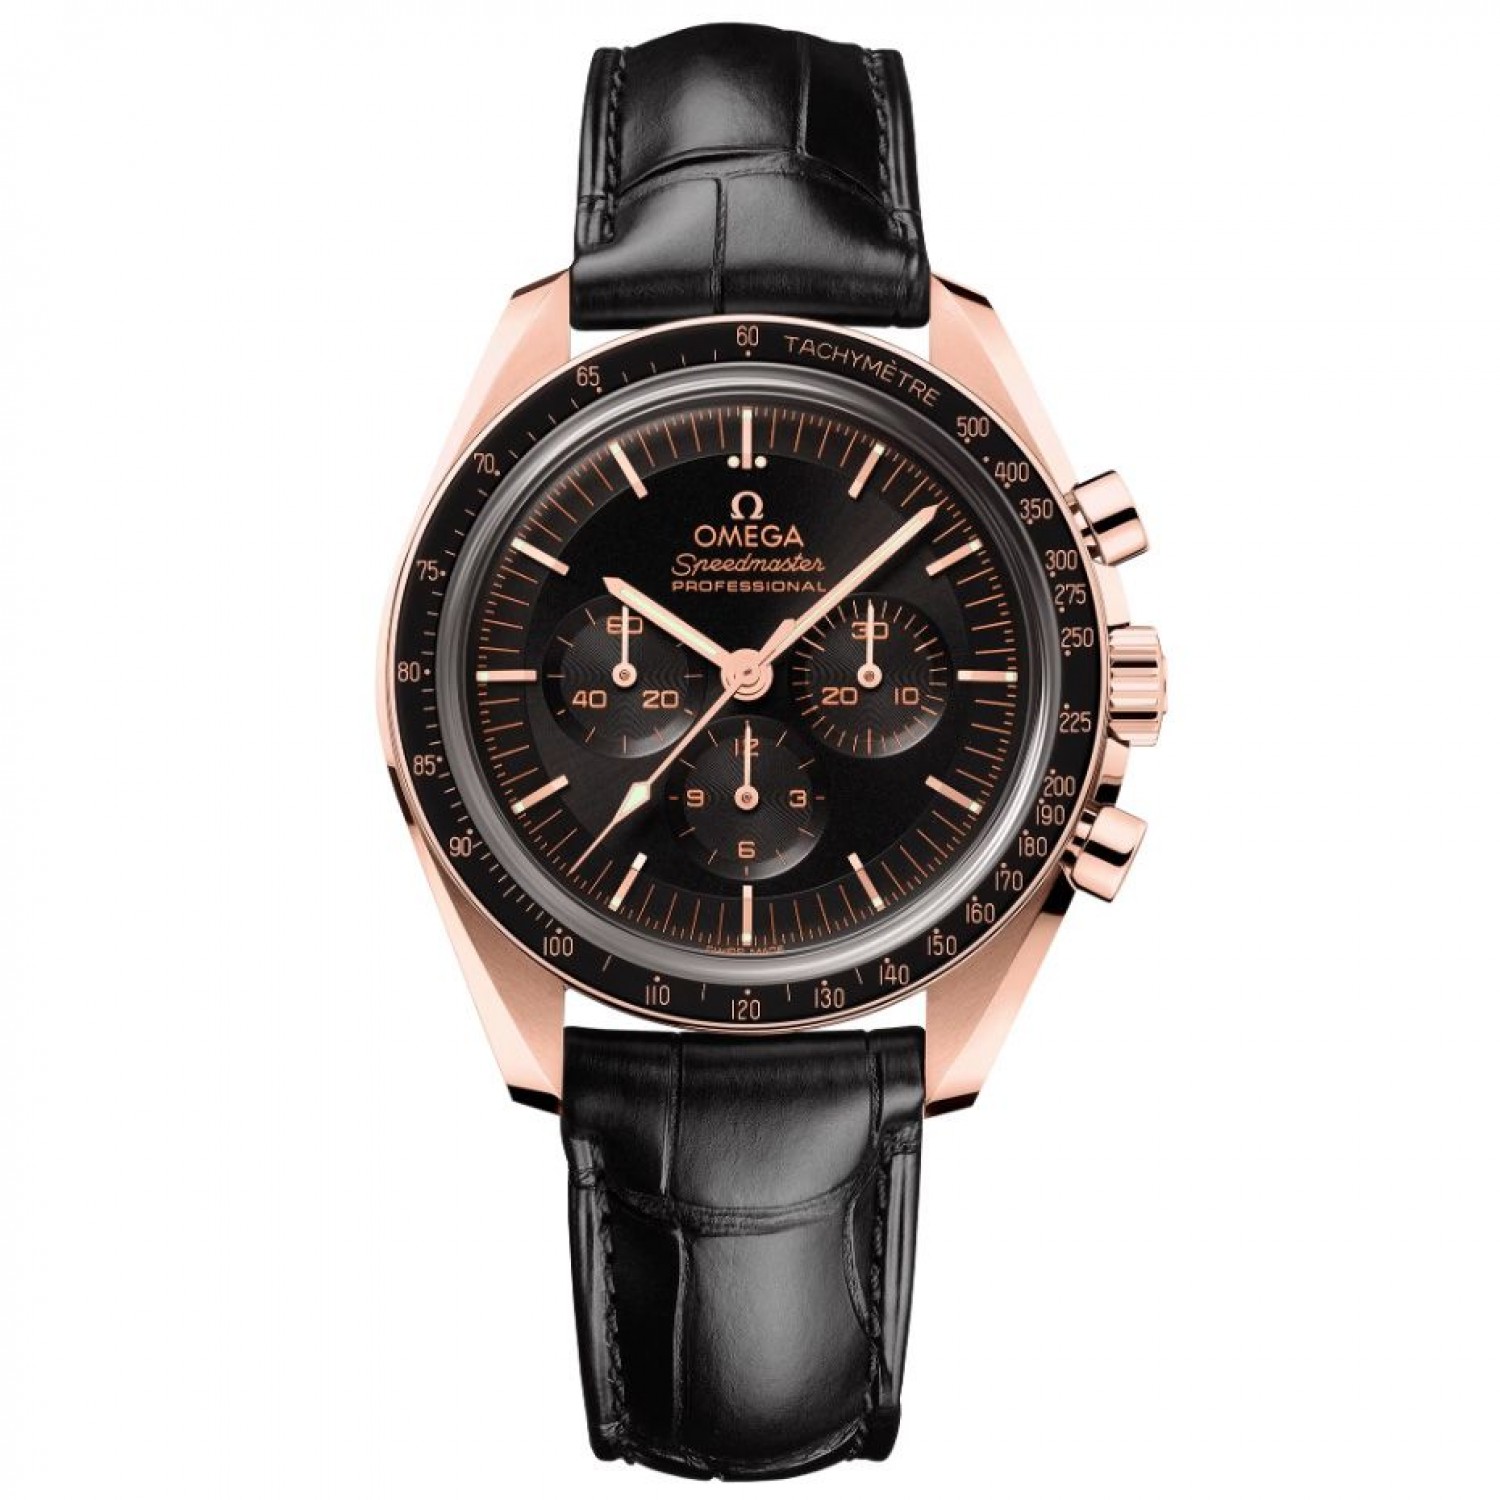 OMEGA Speedmaster Moonwatch Professional Co-Axial Master Chronometer Chronograph Black Leather Strap Watch 42mm